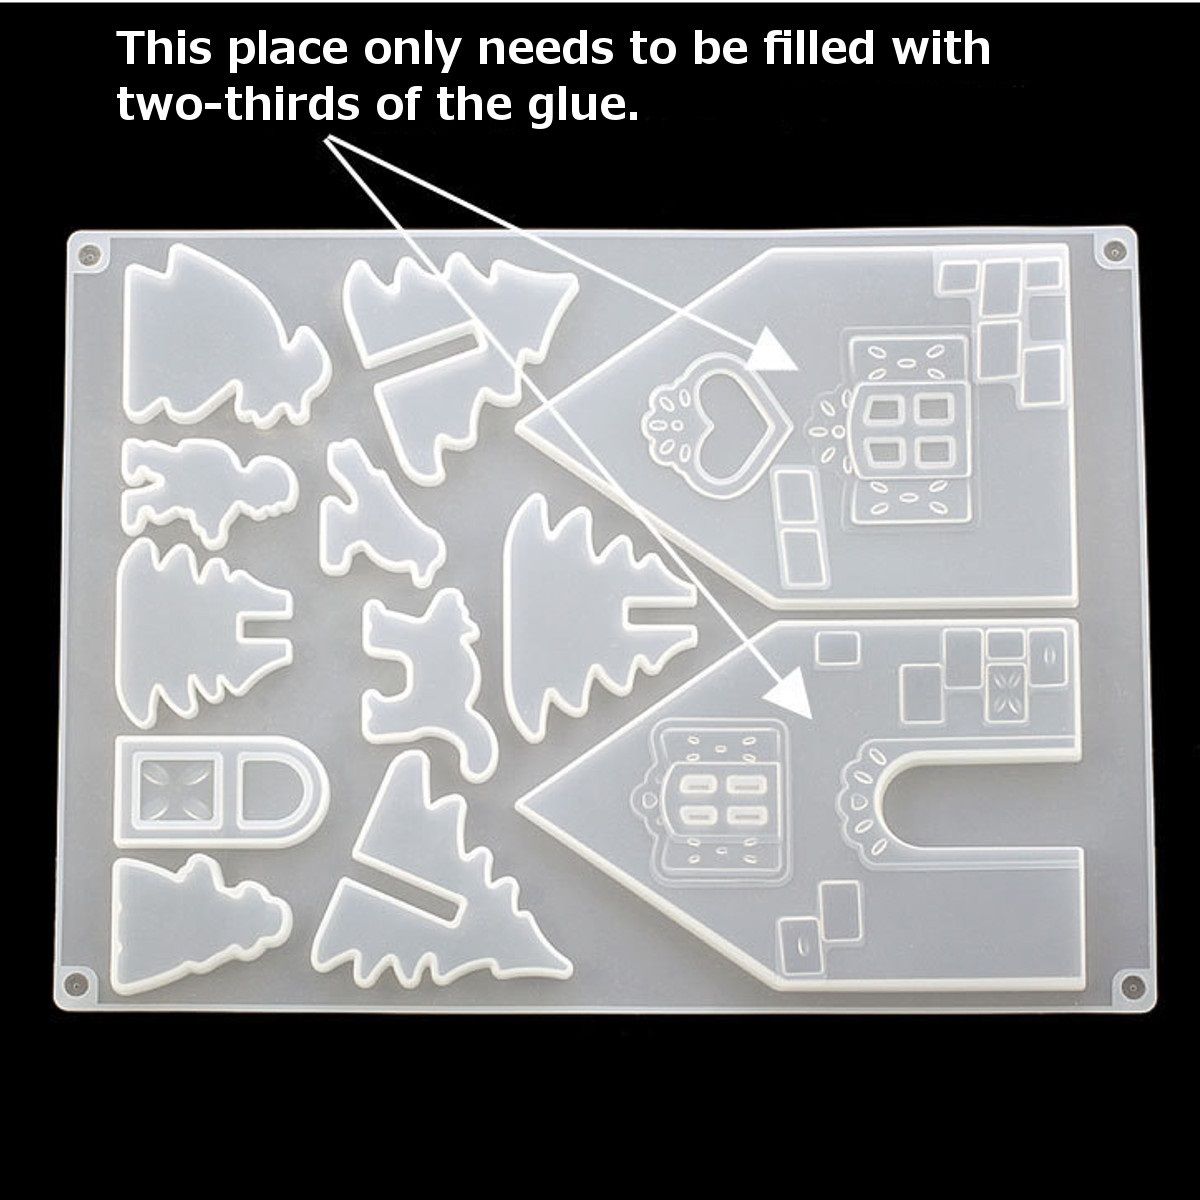 2PcsSet-DIY-Jewelry-Bezel-Making-Crystal-Silicone-Resin-Mould-Casting-Molds-Kit-Art-Craft-1625835